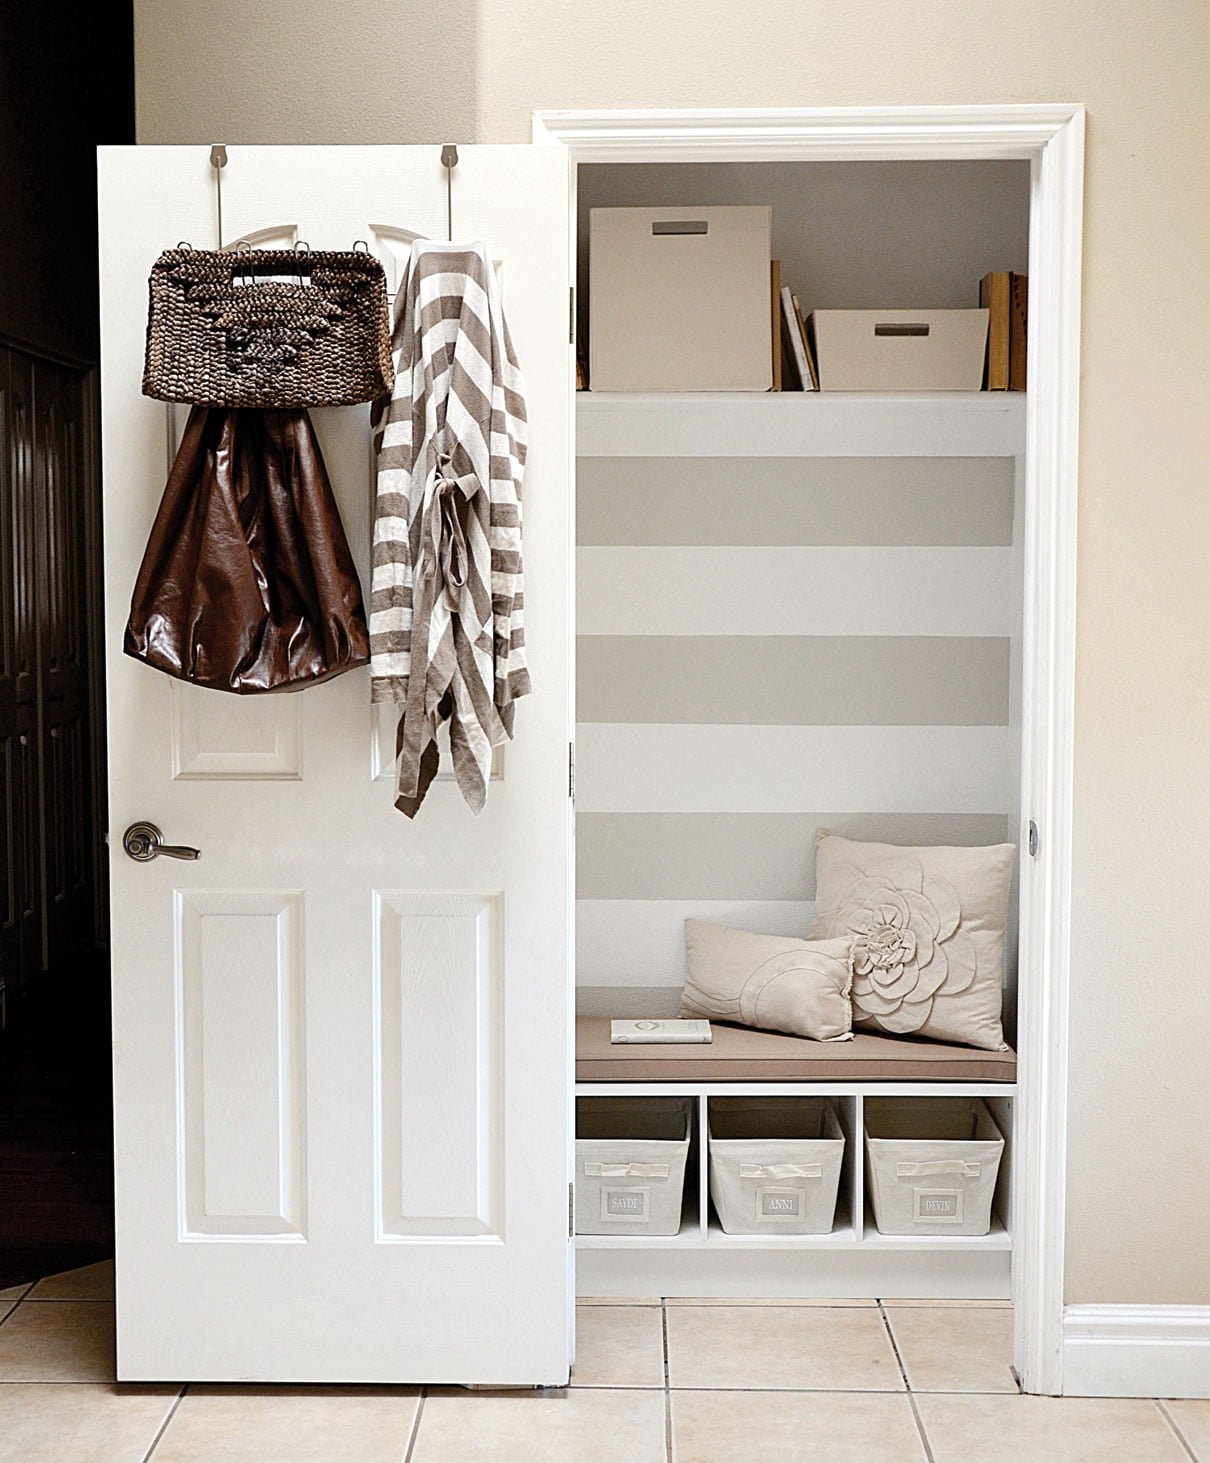 4. Organize your entry closet and make a bench where you can sit and put your shoes on